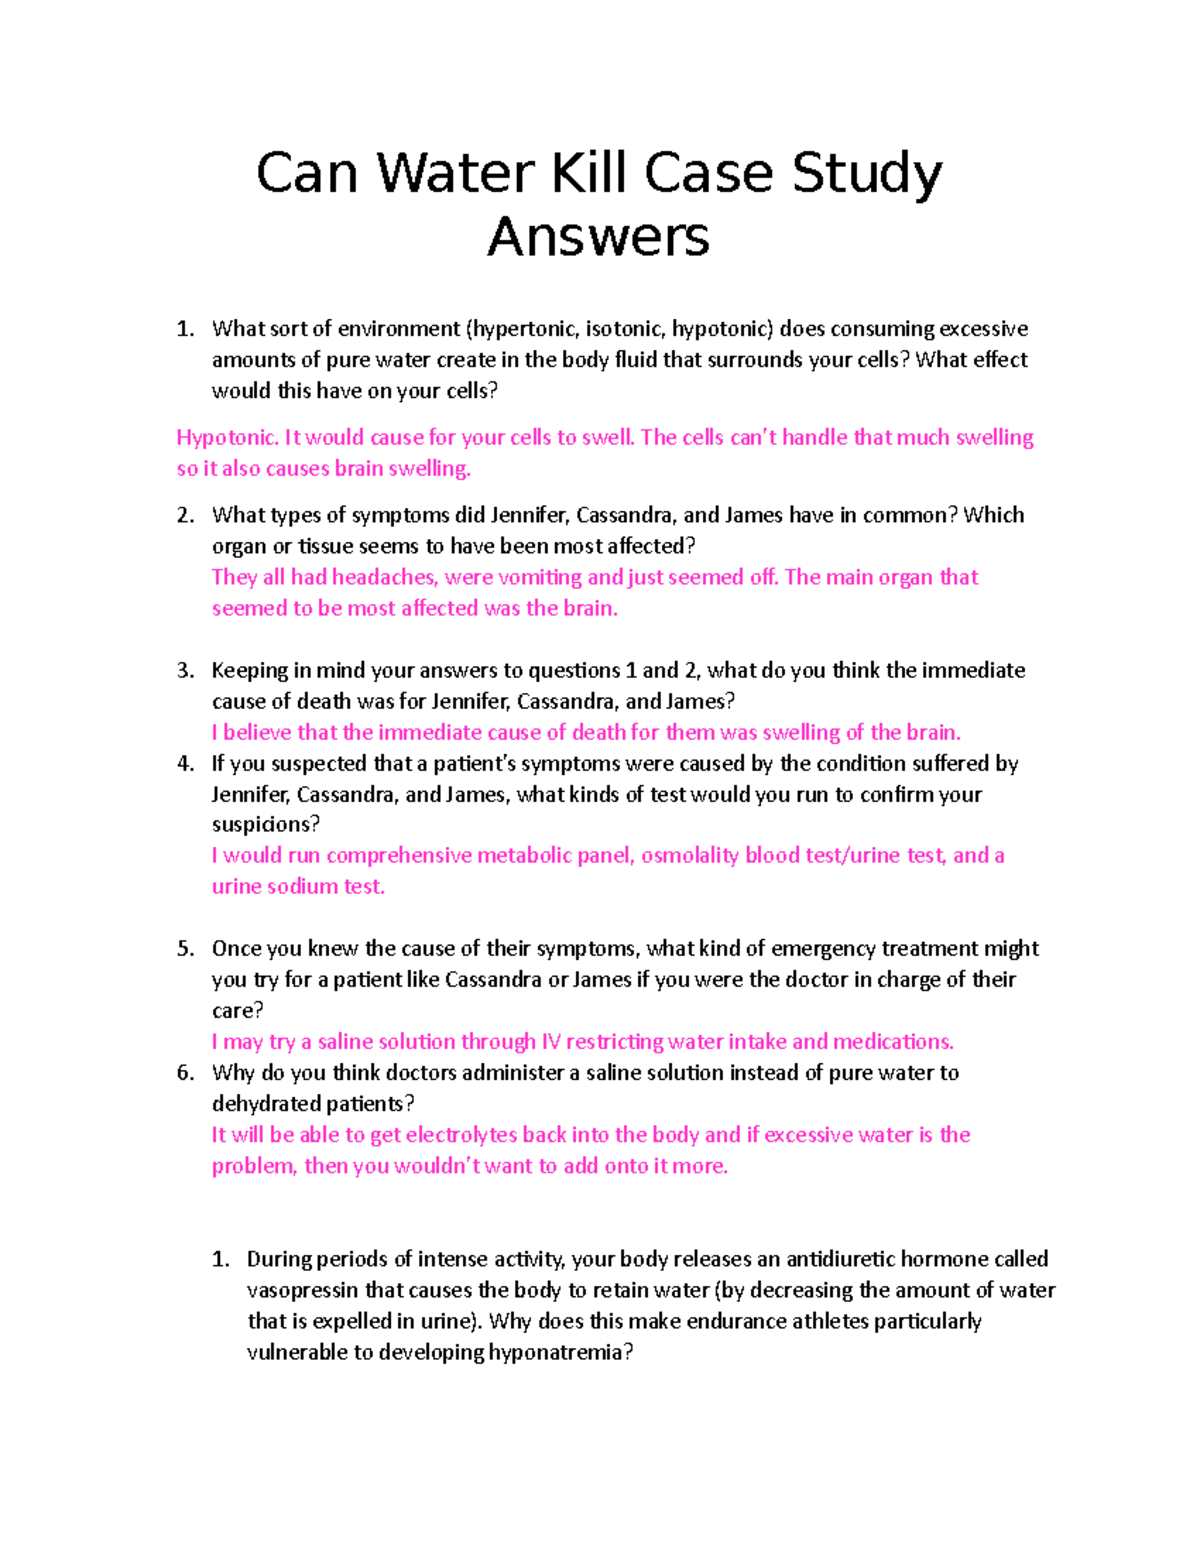 water can kill case study answer key part 2